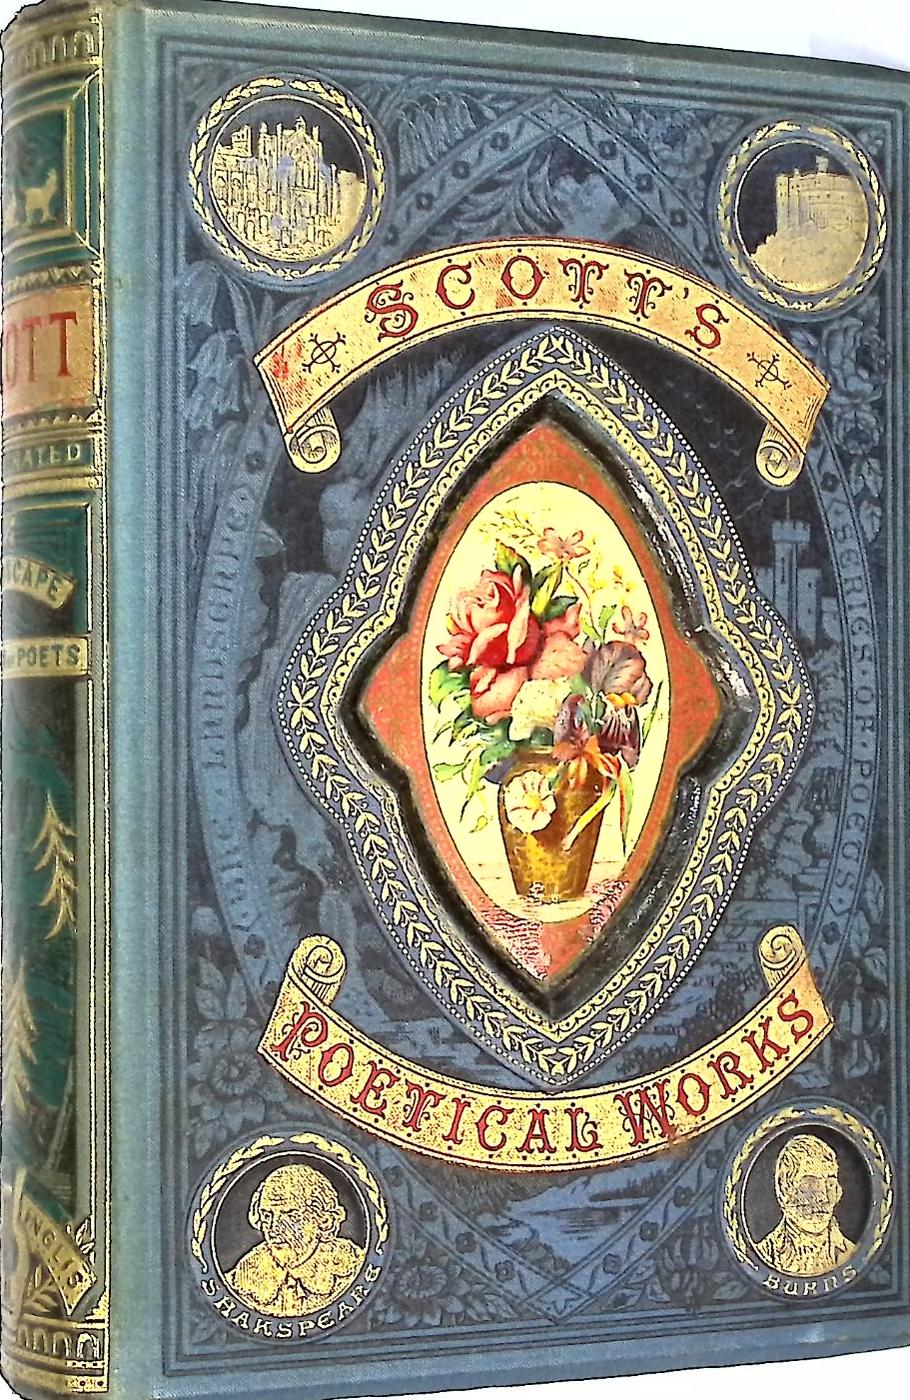 The Poetical Works of Sir Walter Scott with Life.  Gall and Inglis edition.